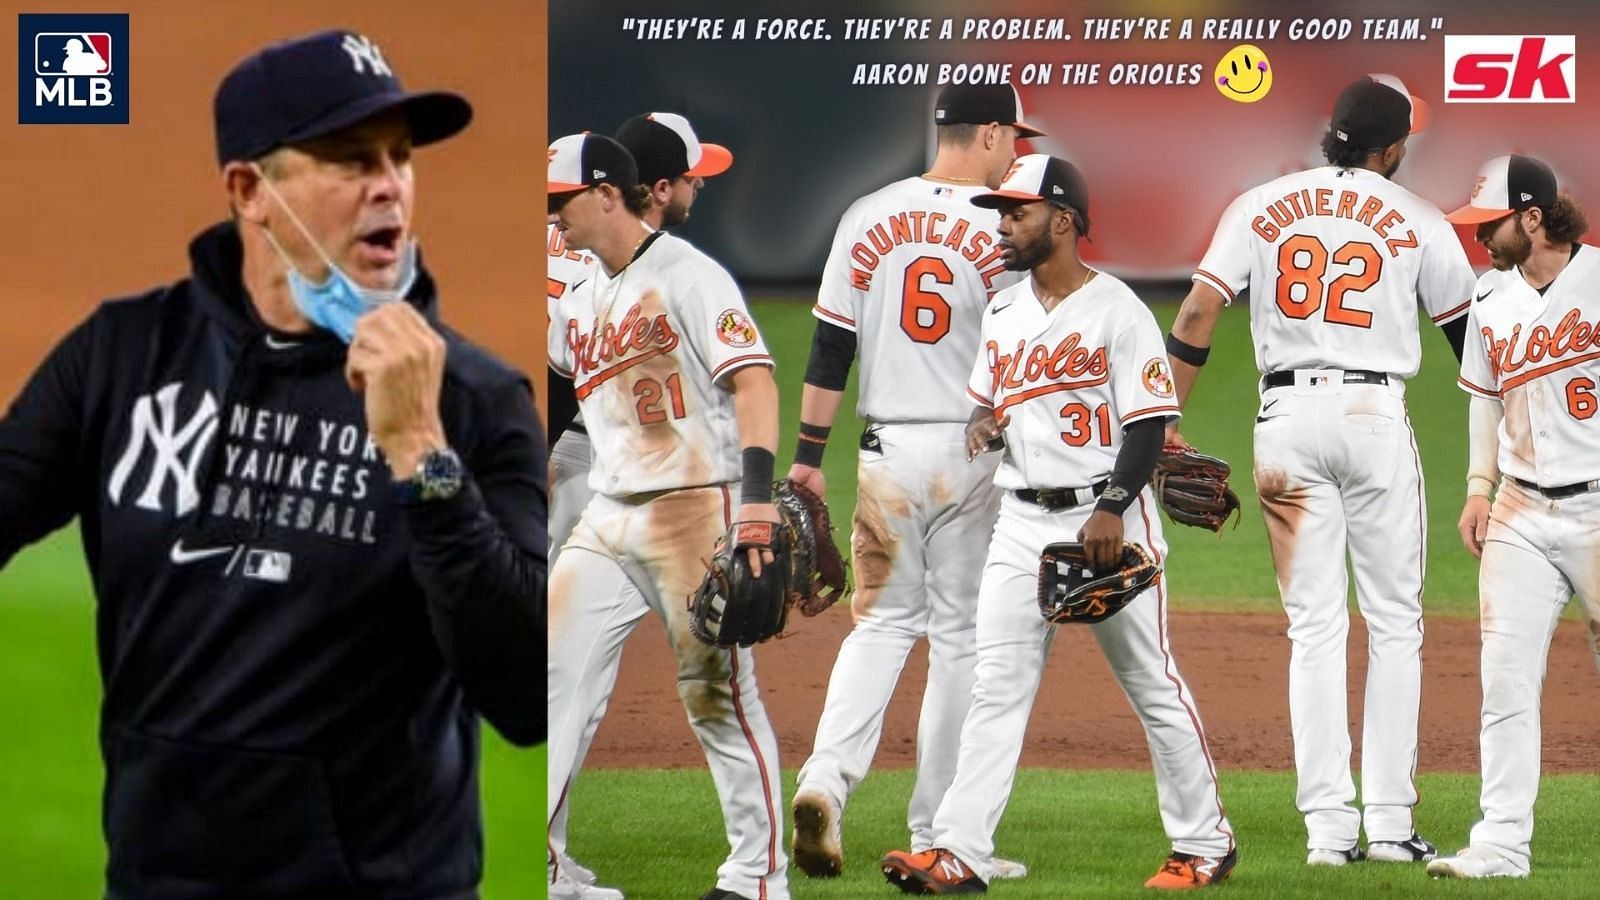 Manager Aaron Boone #17 of the New York Yankees is highly complimentary of the Baltimore Orioles 